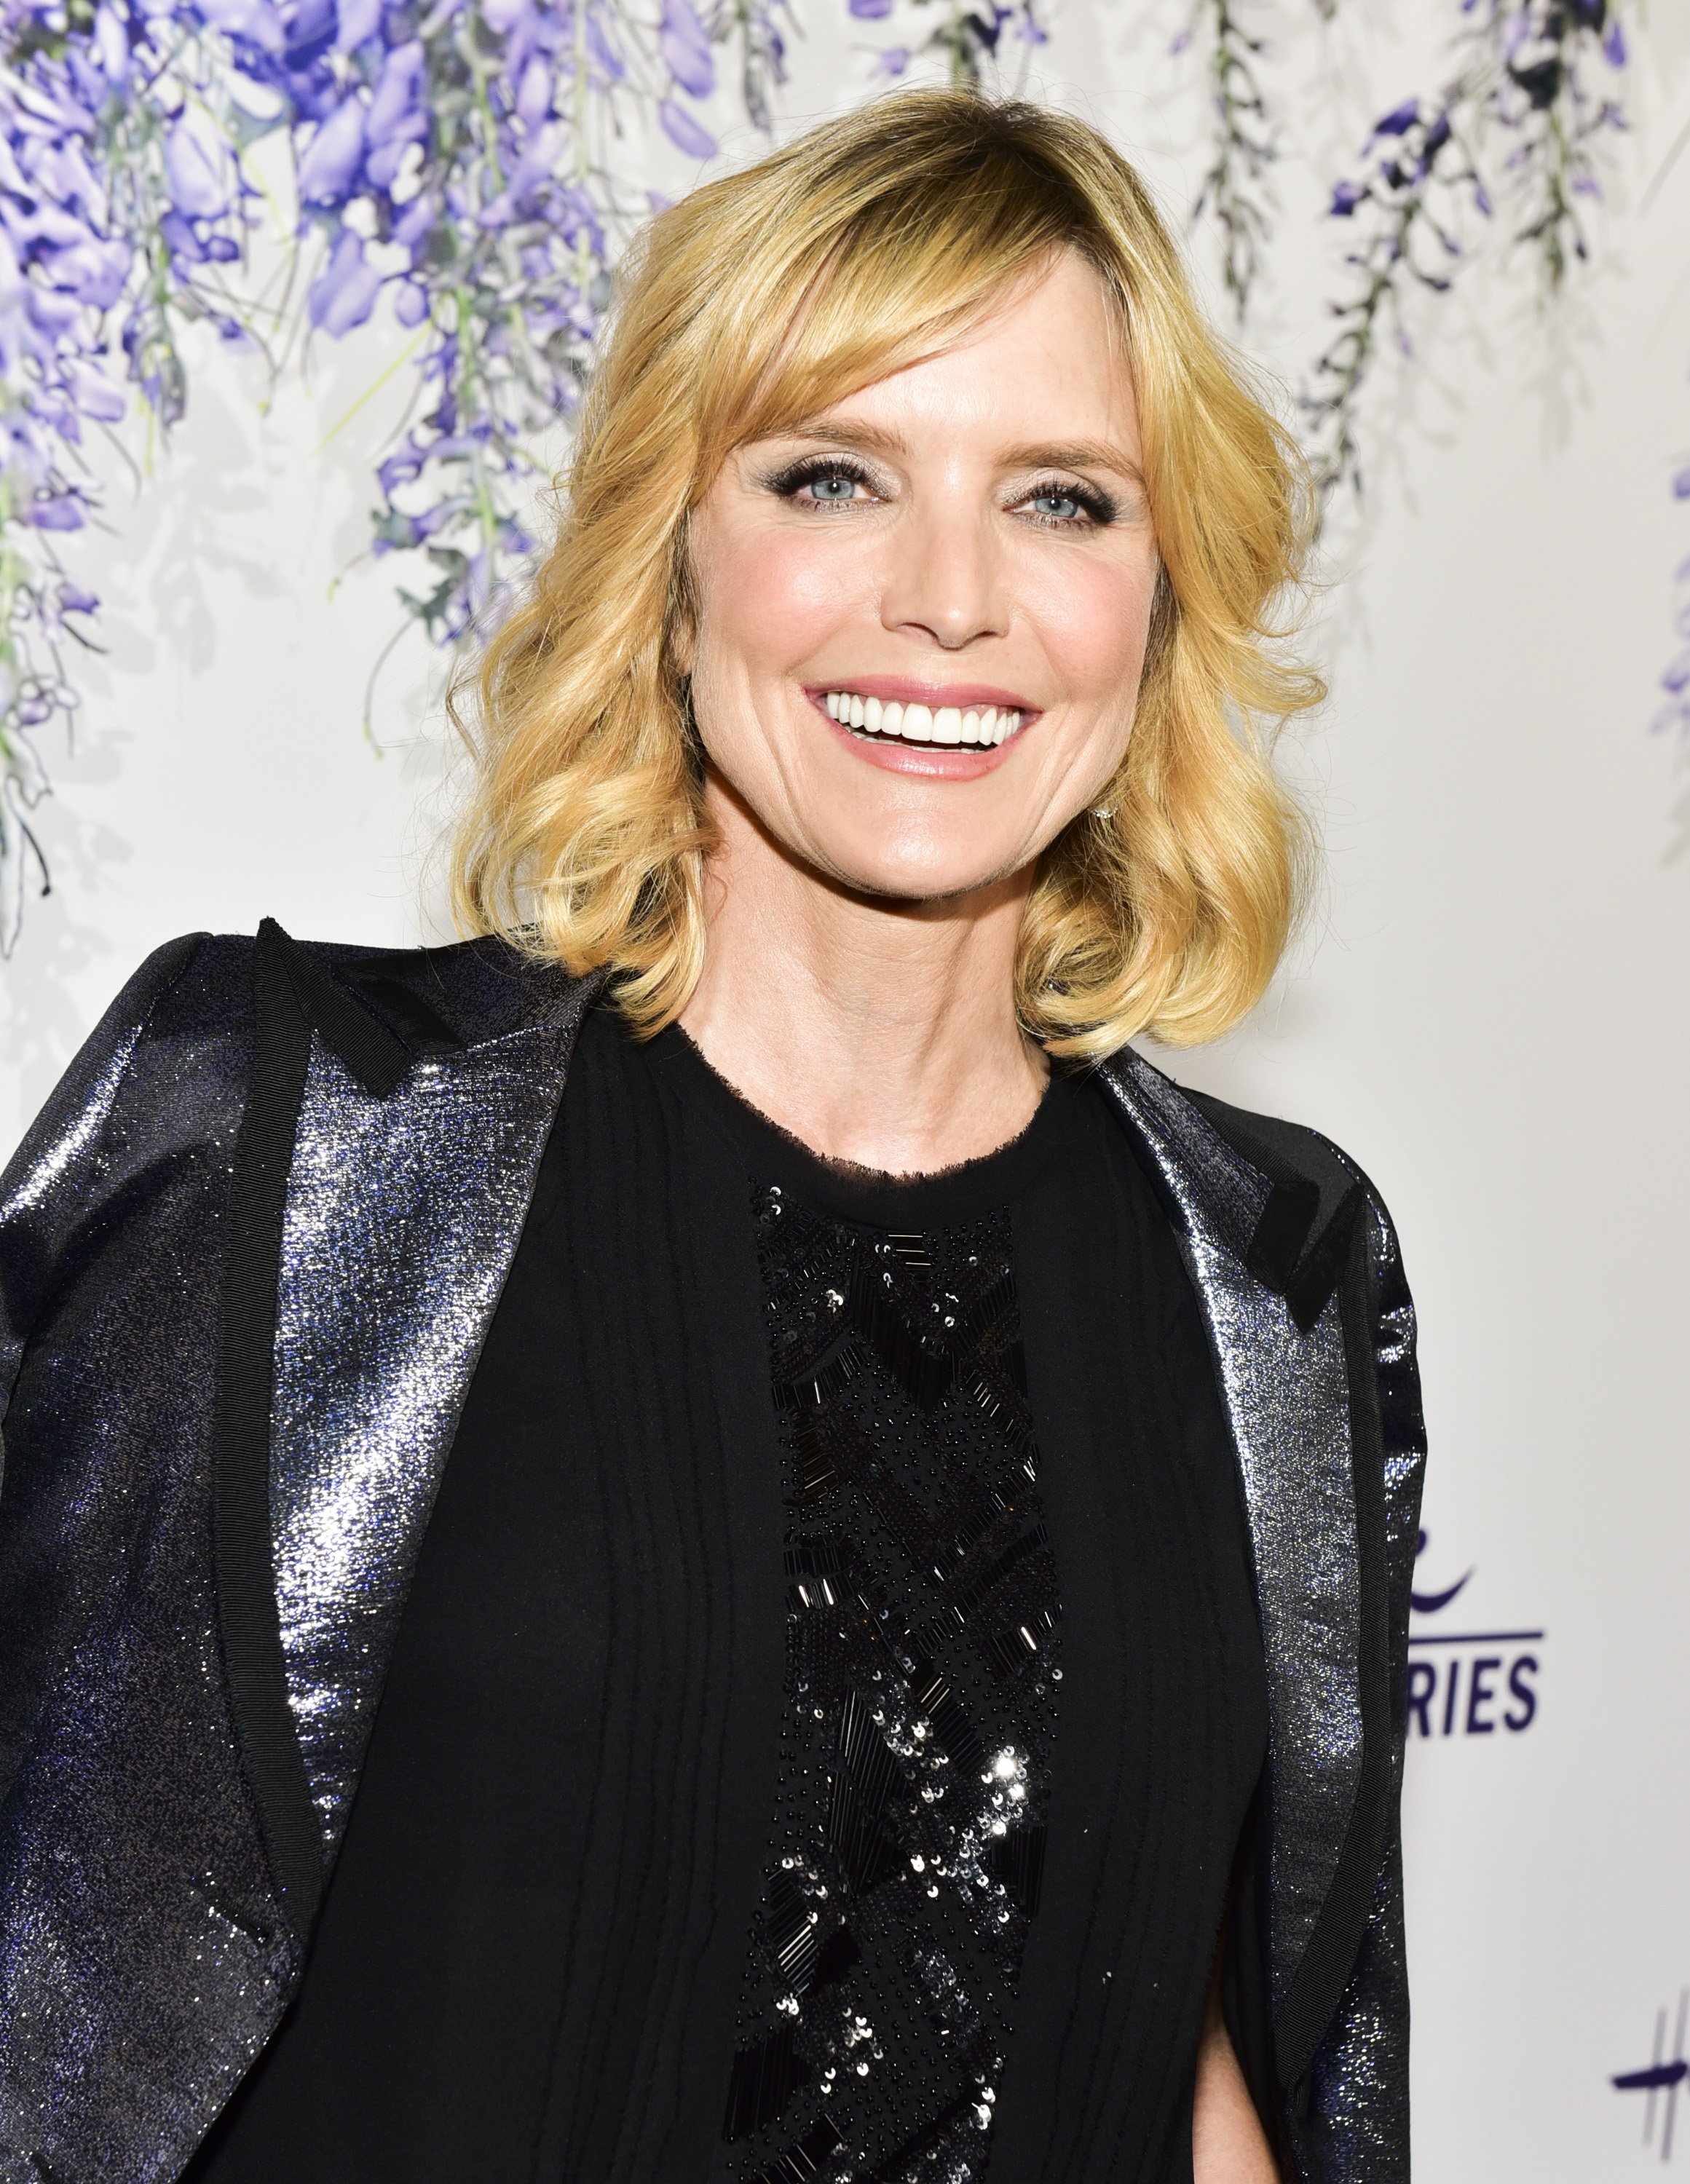 Courtney Thorne-Smith attends the 2018 Hallmark Channel Summer TCA at a private residence on July 26, 2018, in Beverly Hills, California. | Source: Getty Images.